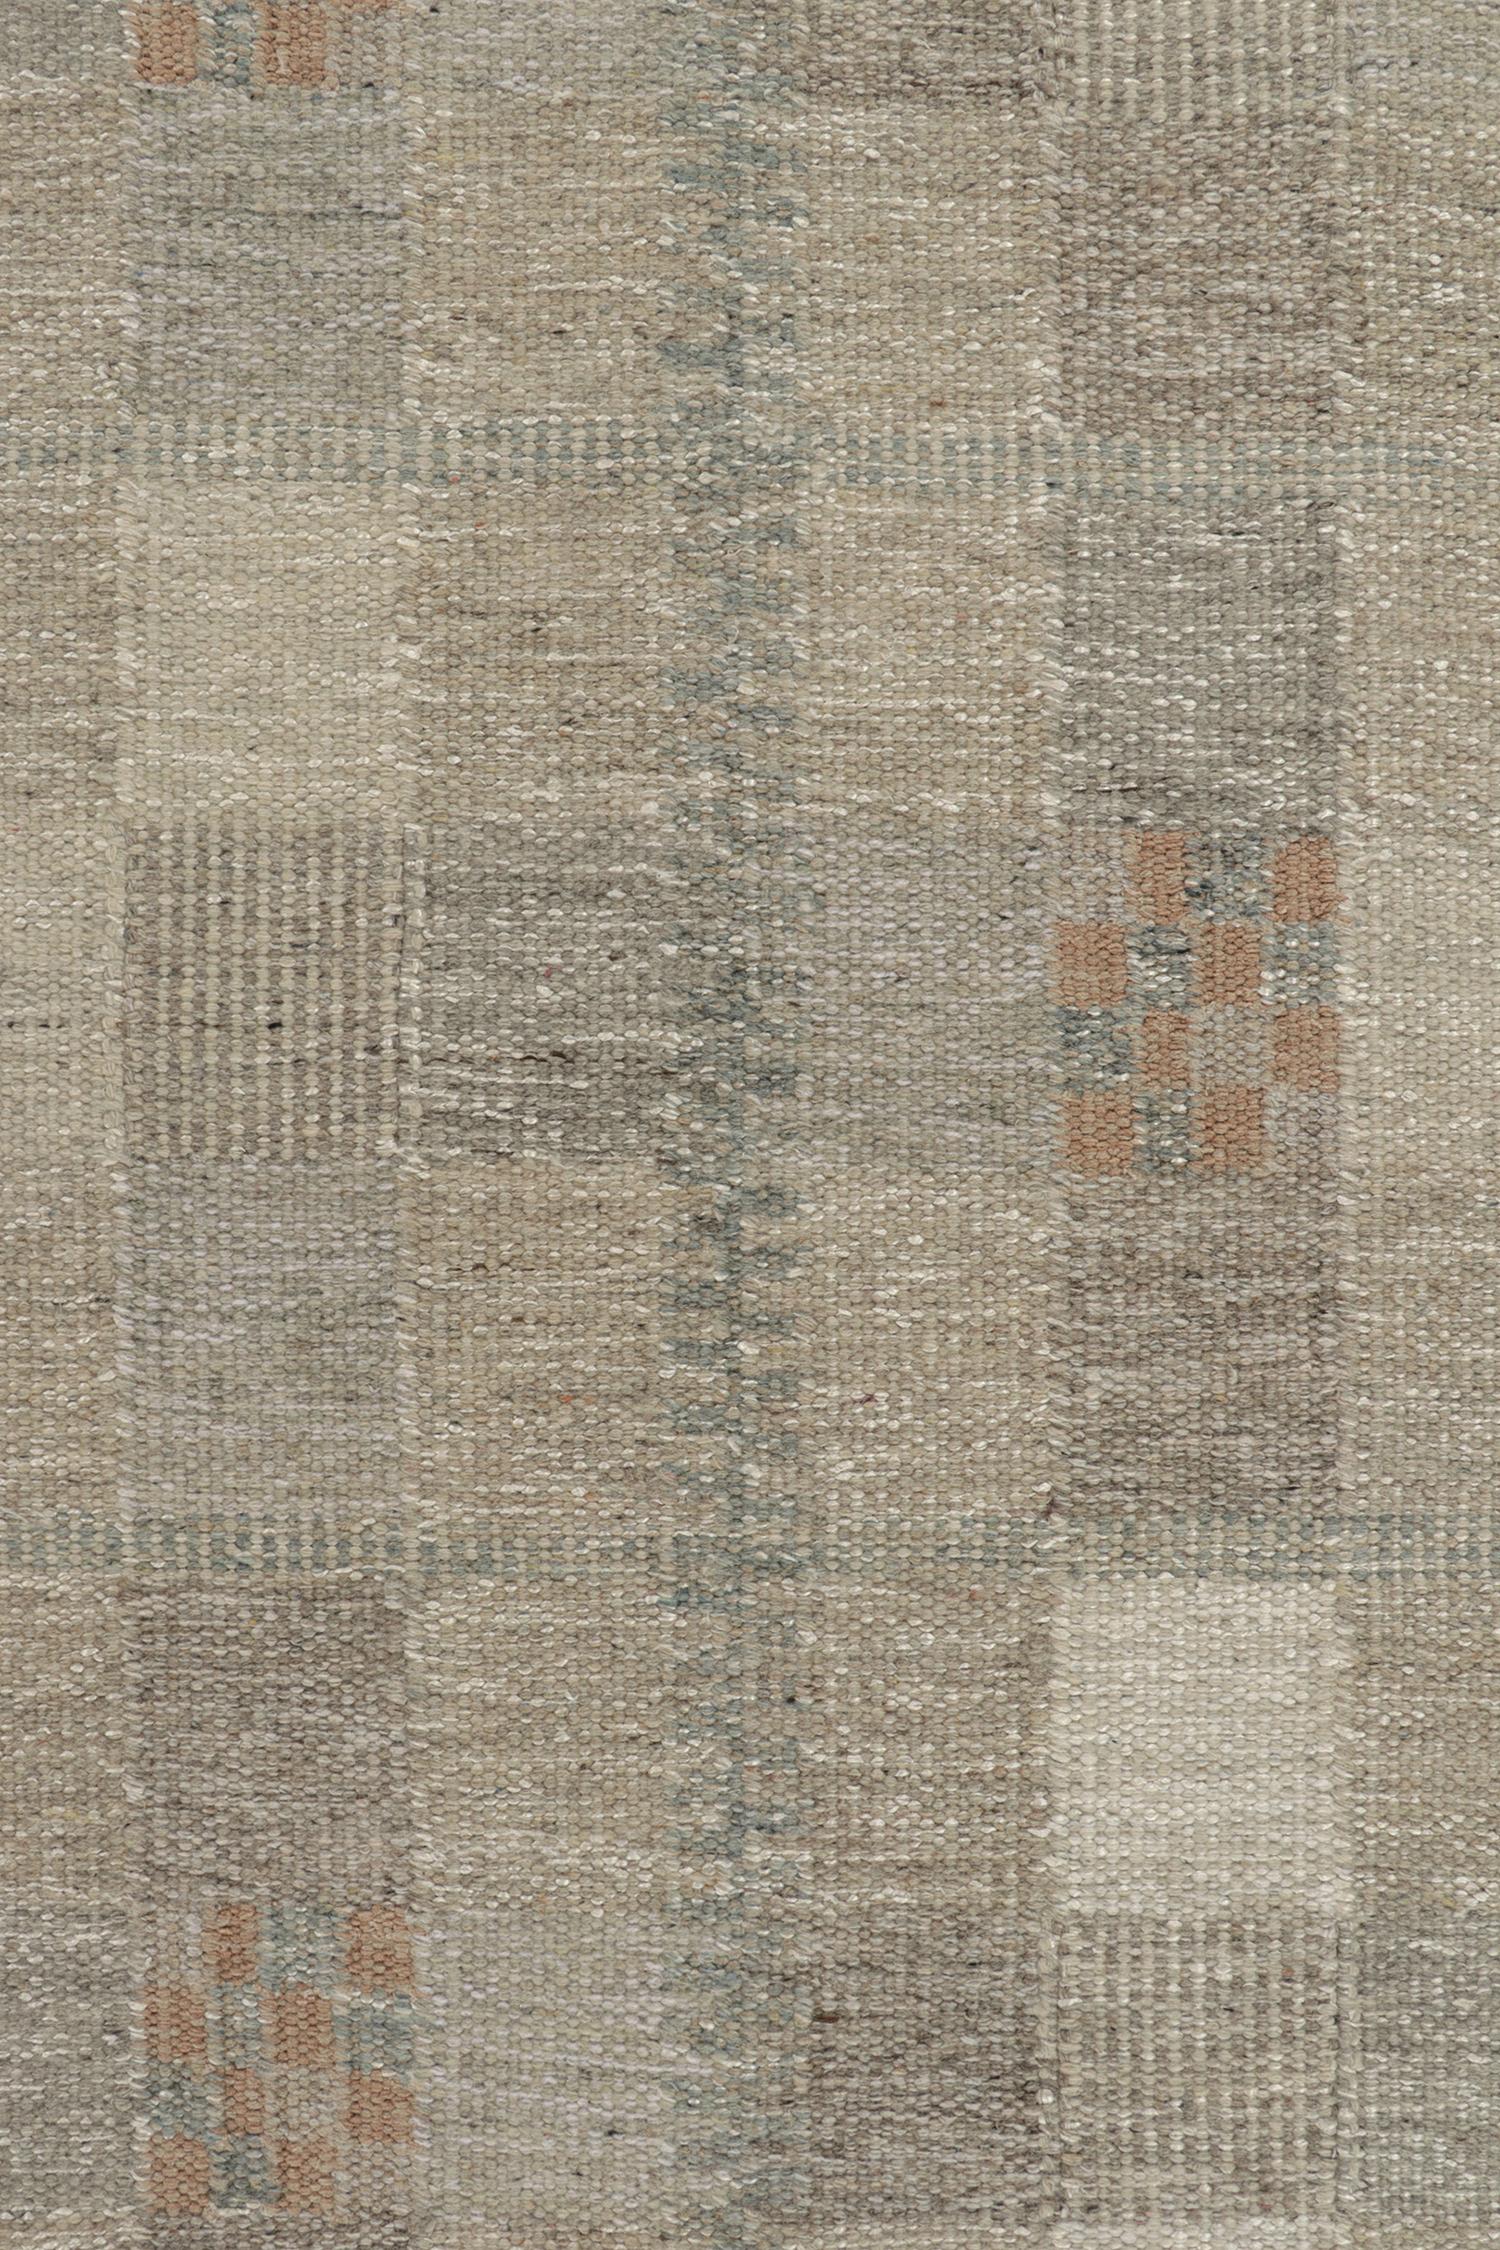 Rug & Kilim's Scandinavian Style Kilim Runner in Beige-Brown Geometric Pattern In New Condition For Sale In Long Island City, NY